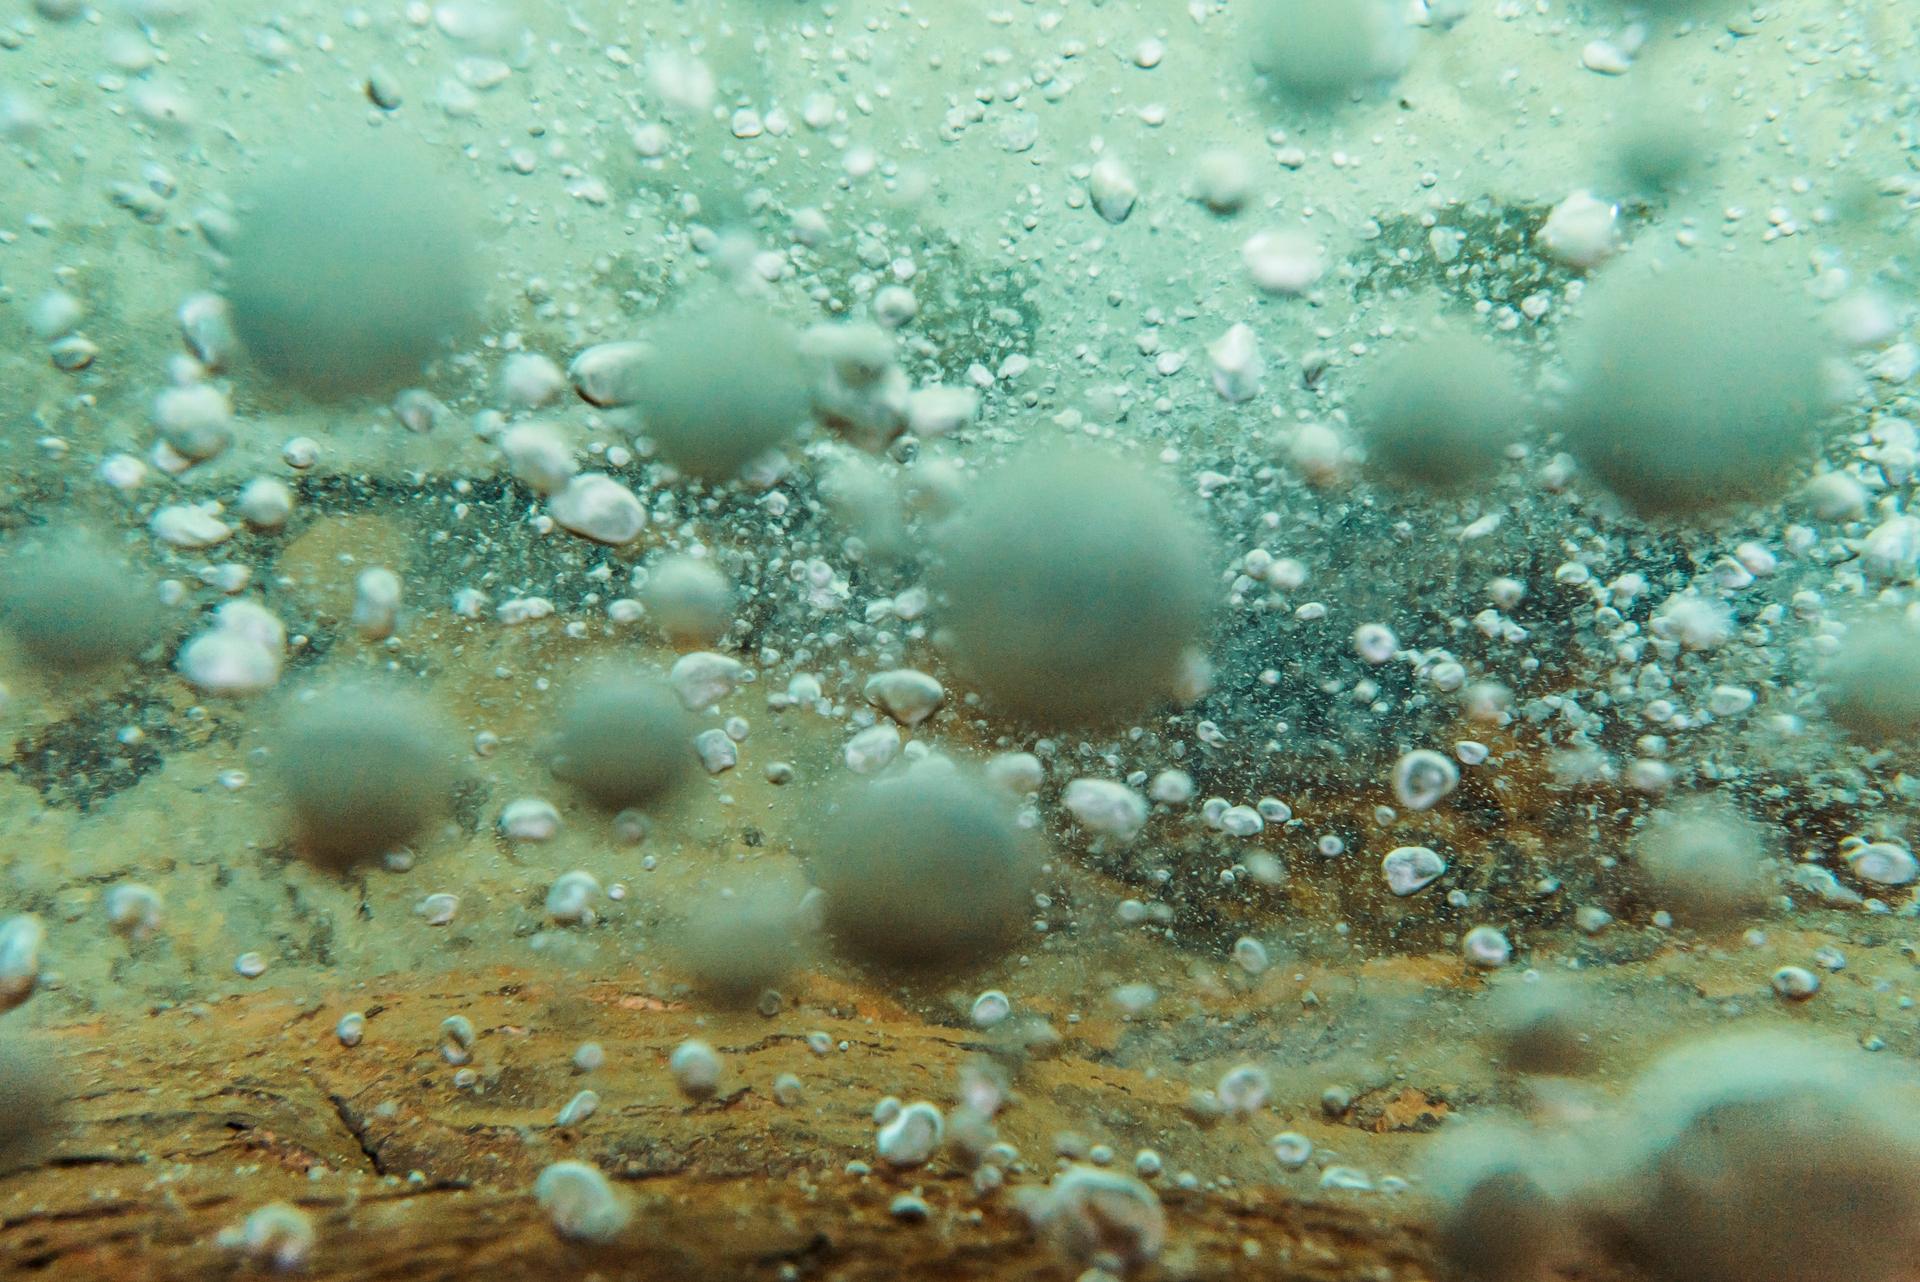 Under the surface of the Boiling River